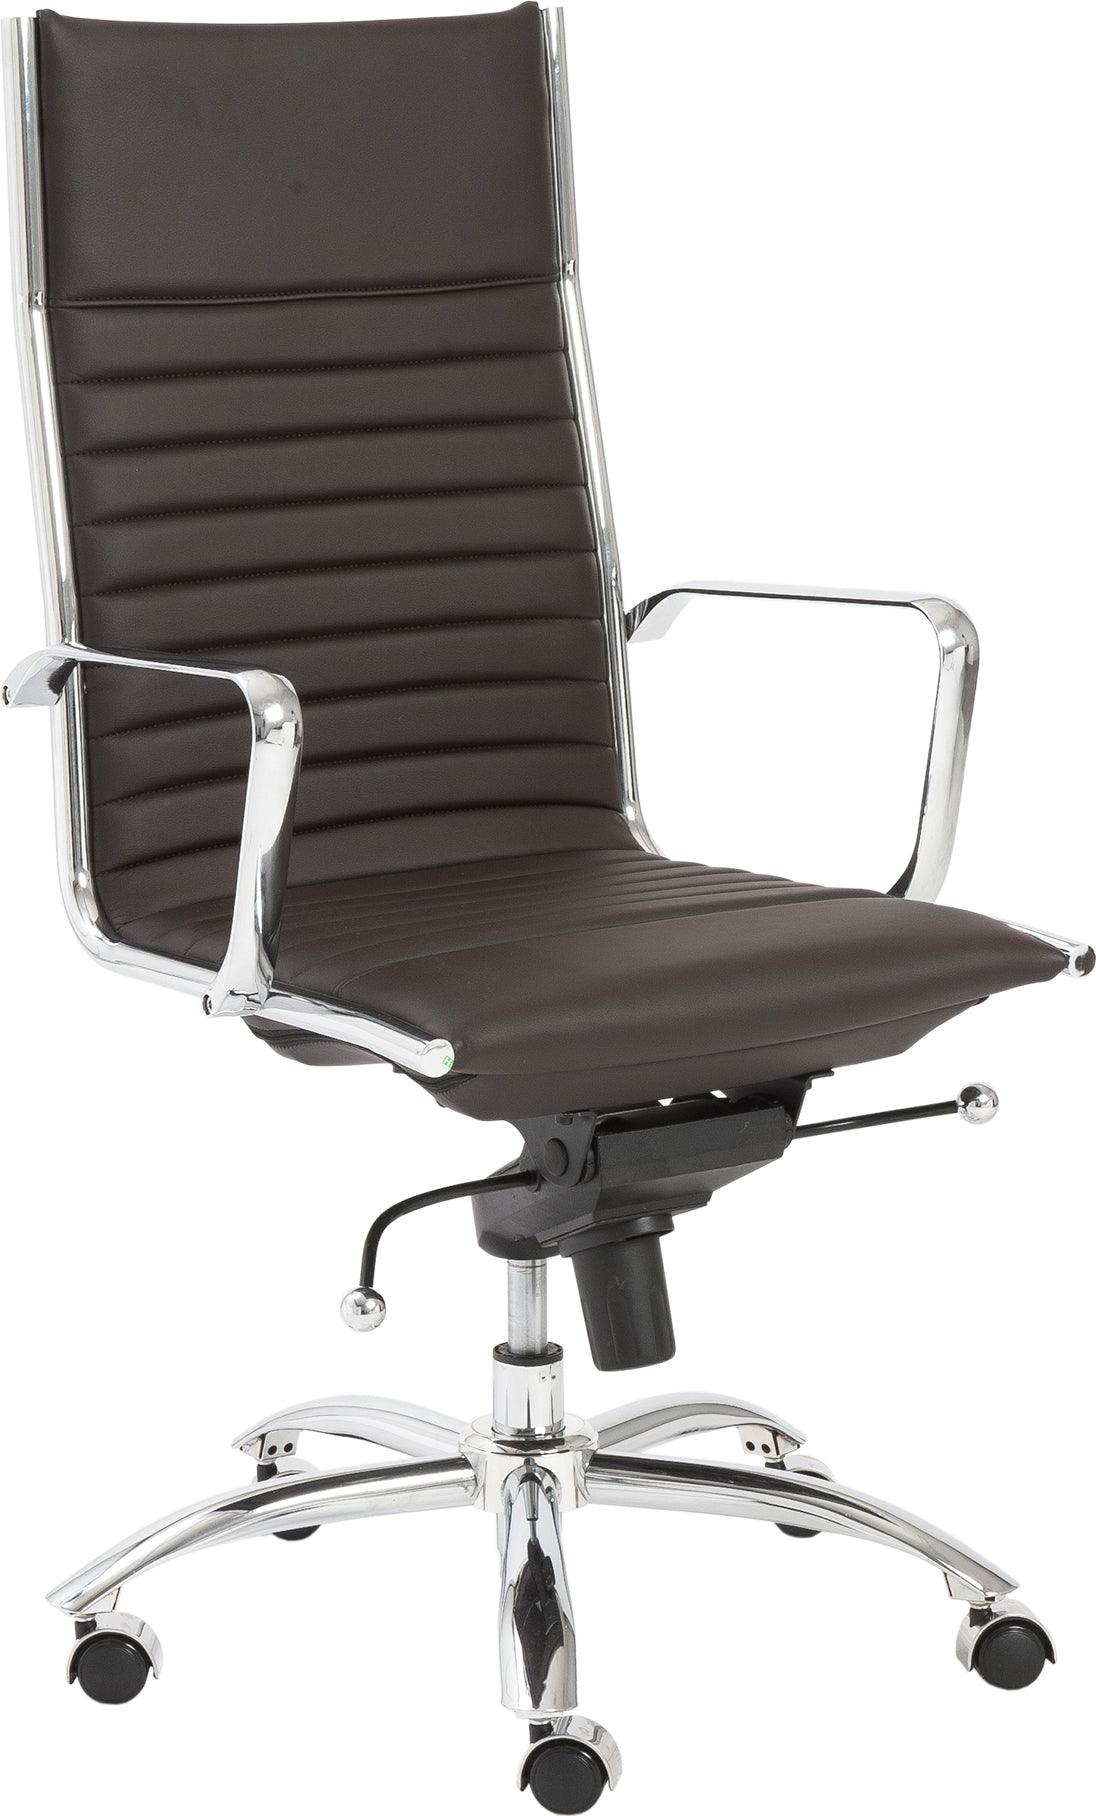 Euro Style Task Chairs - Dirk High Back Office Chair Brown